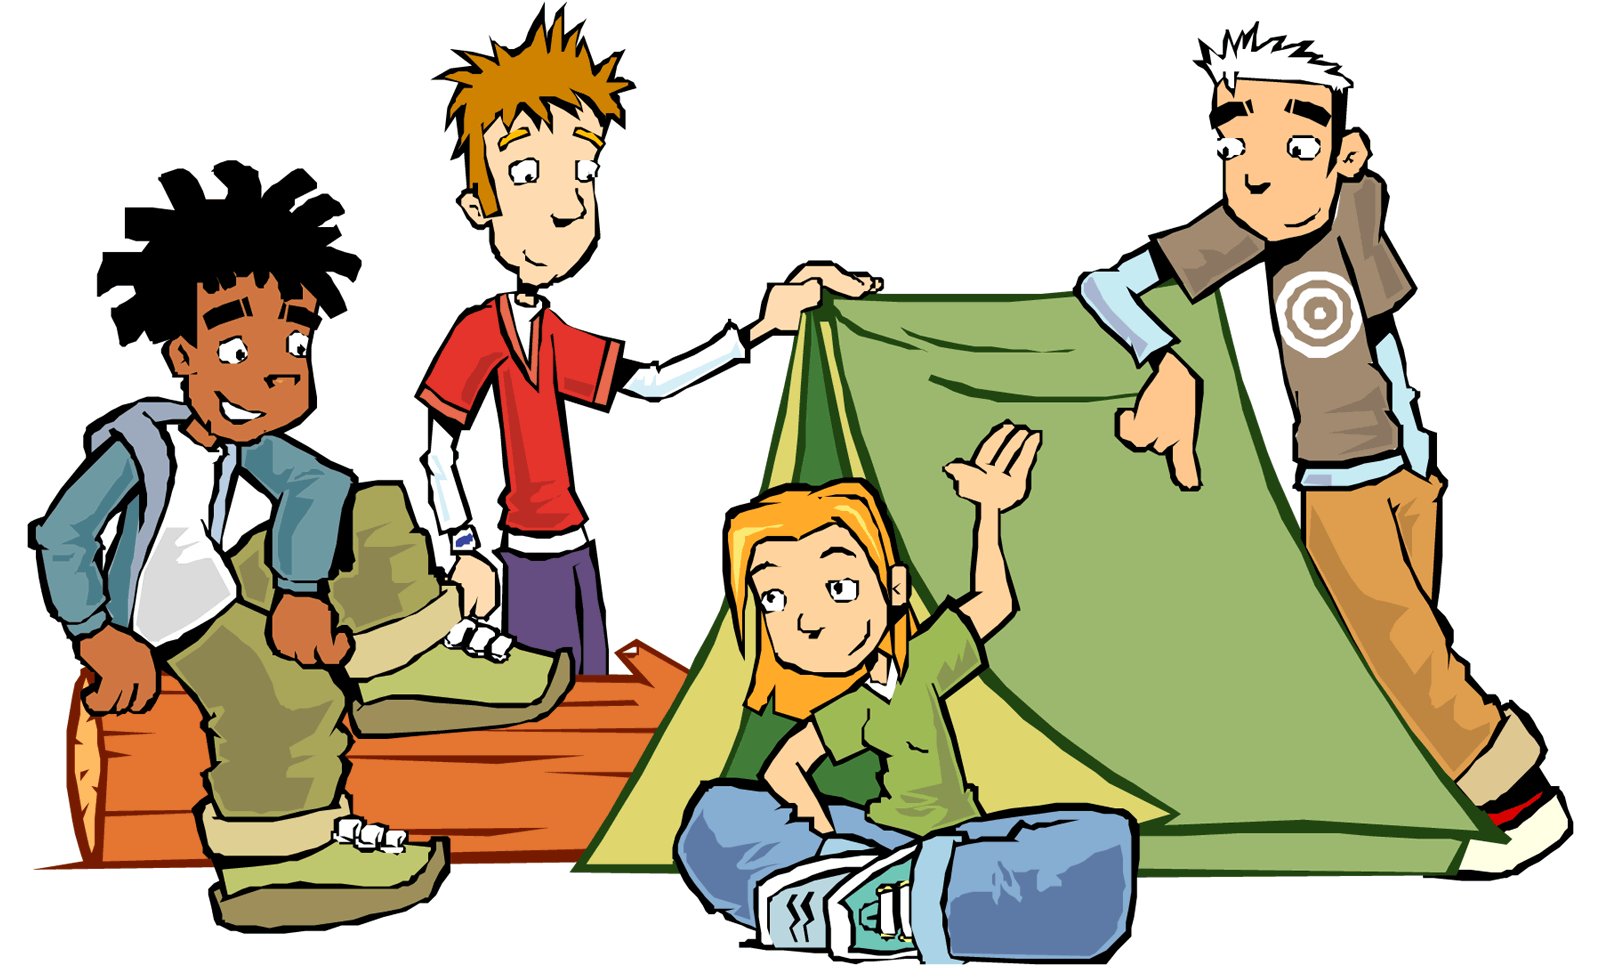 Kids Summer Camp Clipart - Free Clipart Images